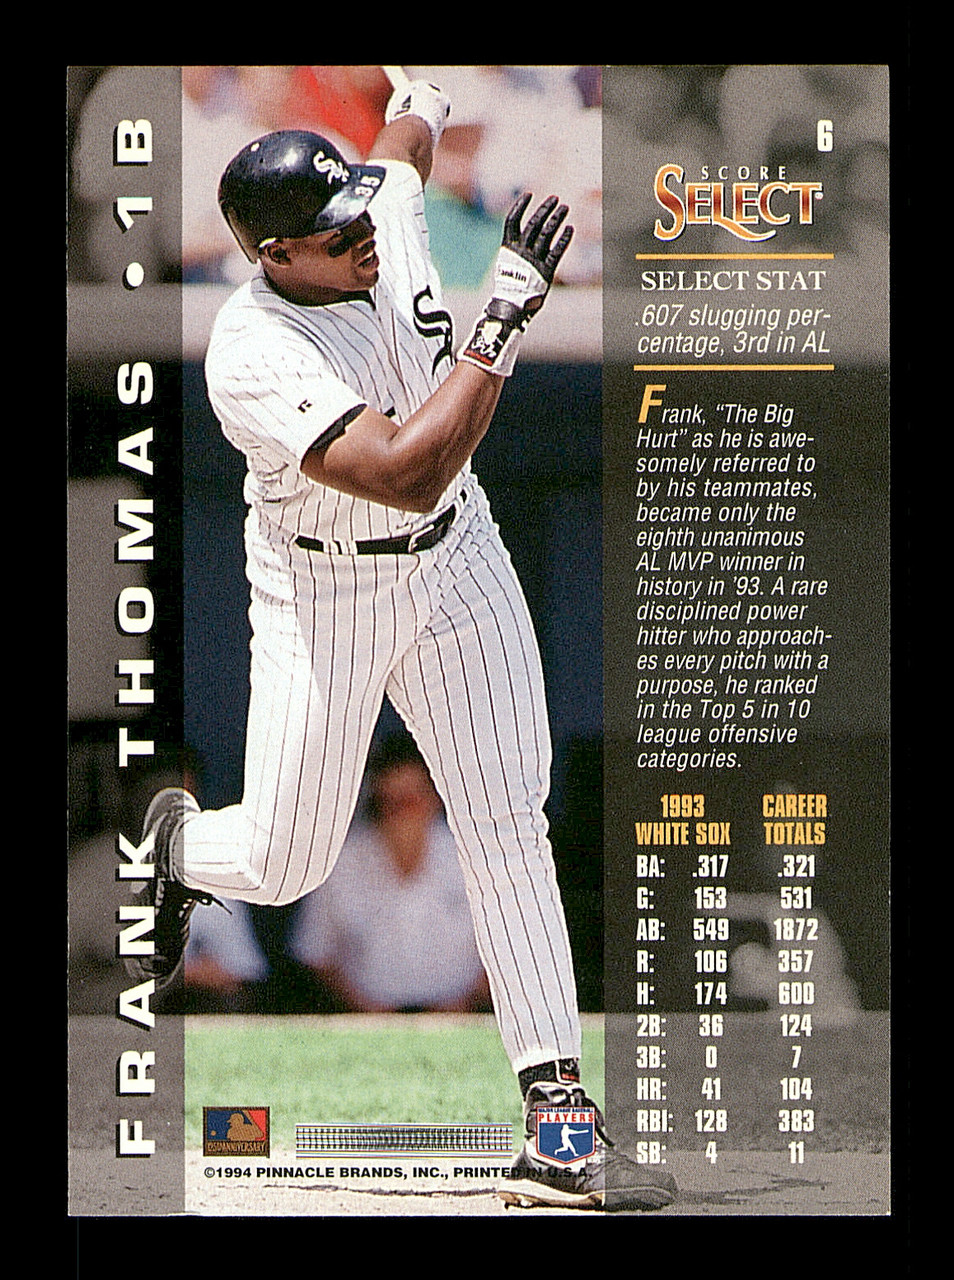 Autograph Warehouse 653535 Frank Thomas Player Worn Jersey Patch Baseball Card - Chicago White Sox - 2002 Upper Deck Diamond Connection No.262 Le 11